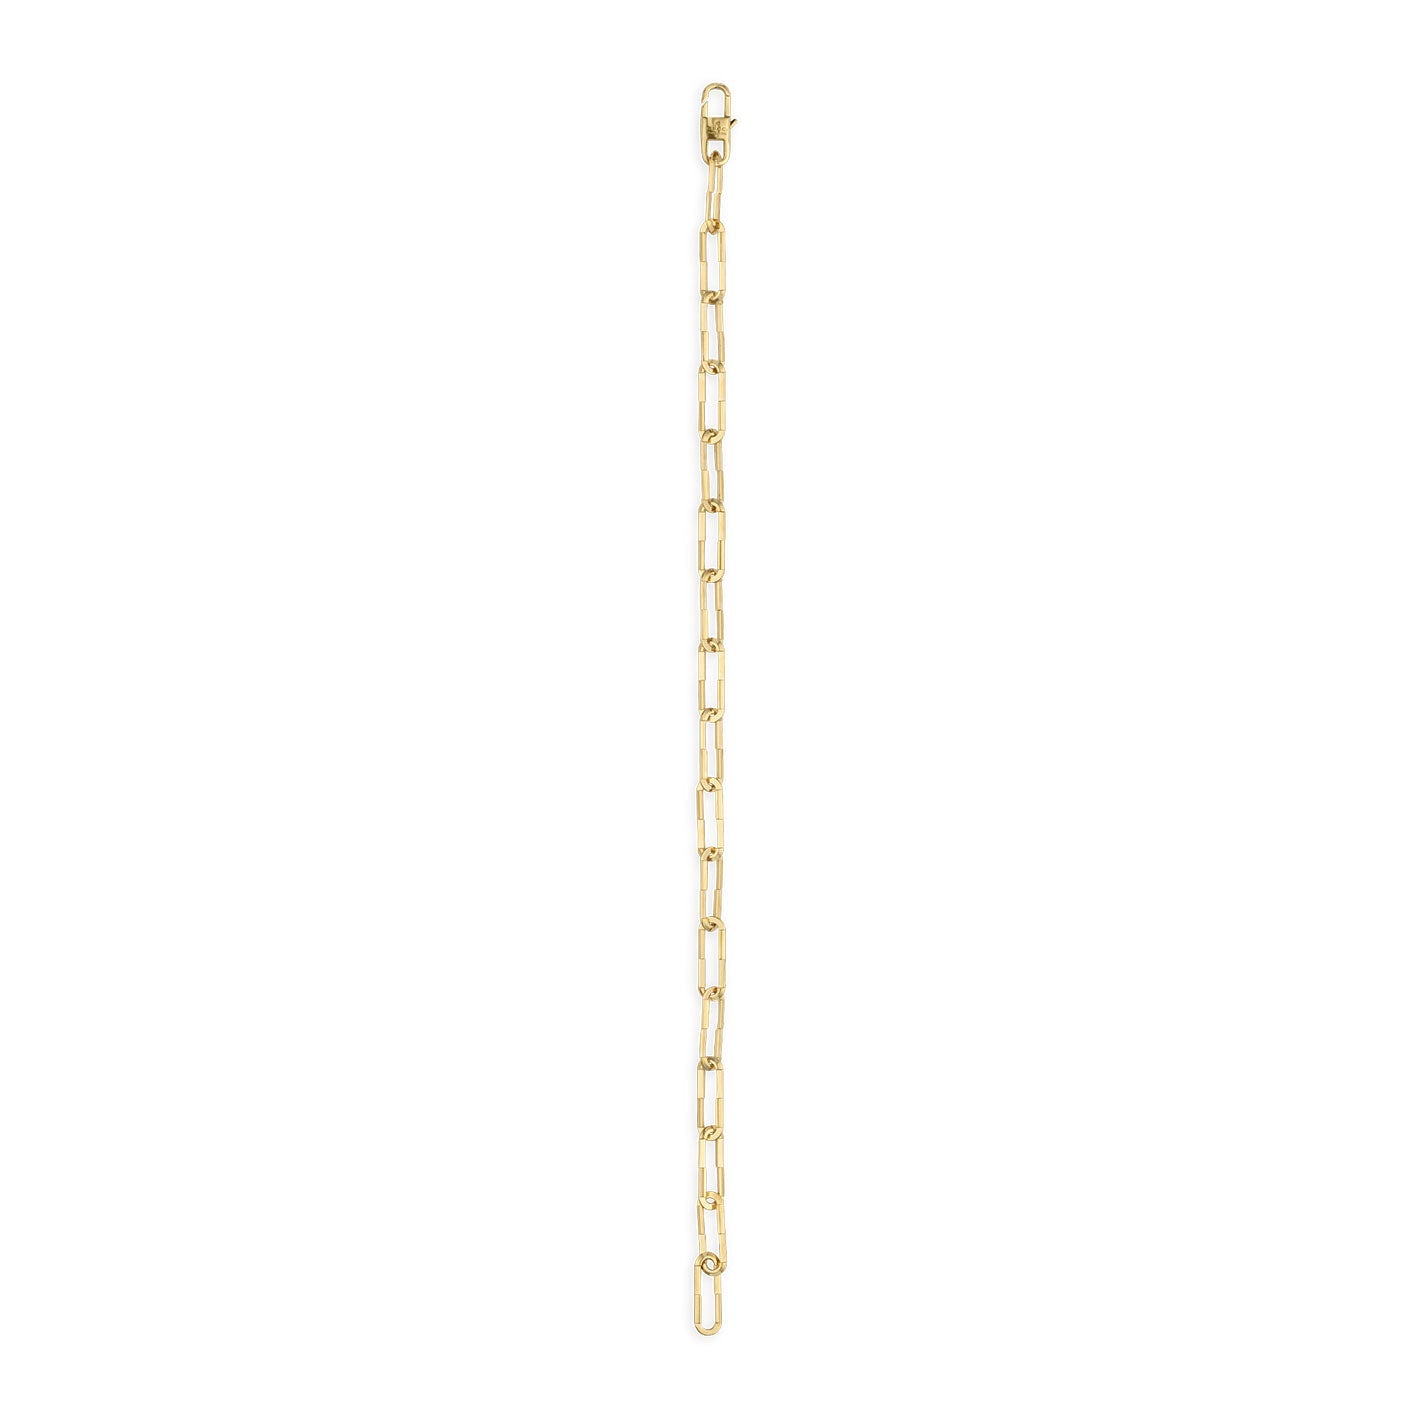 Gucci Link to Love 18K Yellow Gold Chain Bracelet